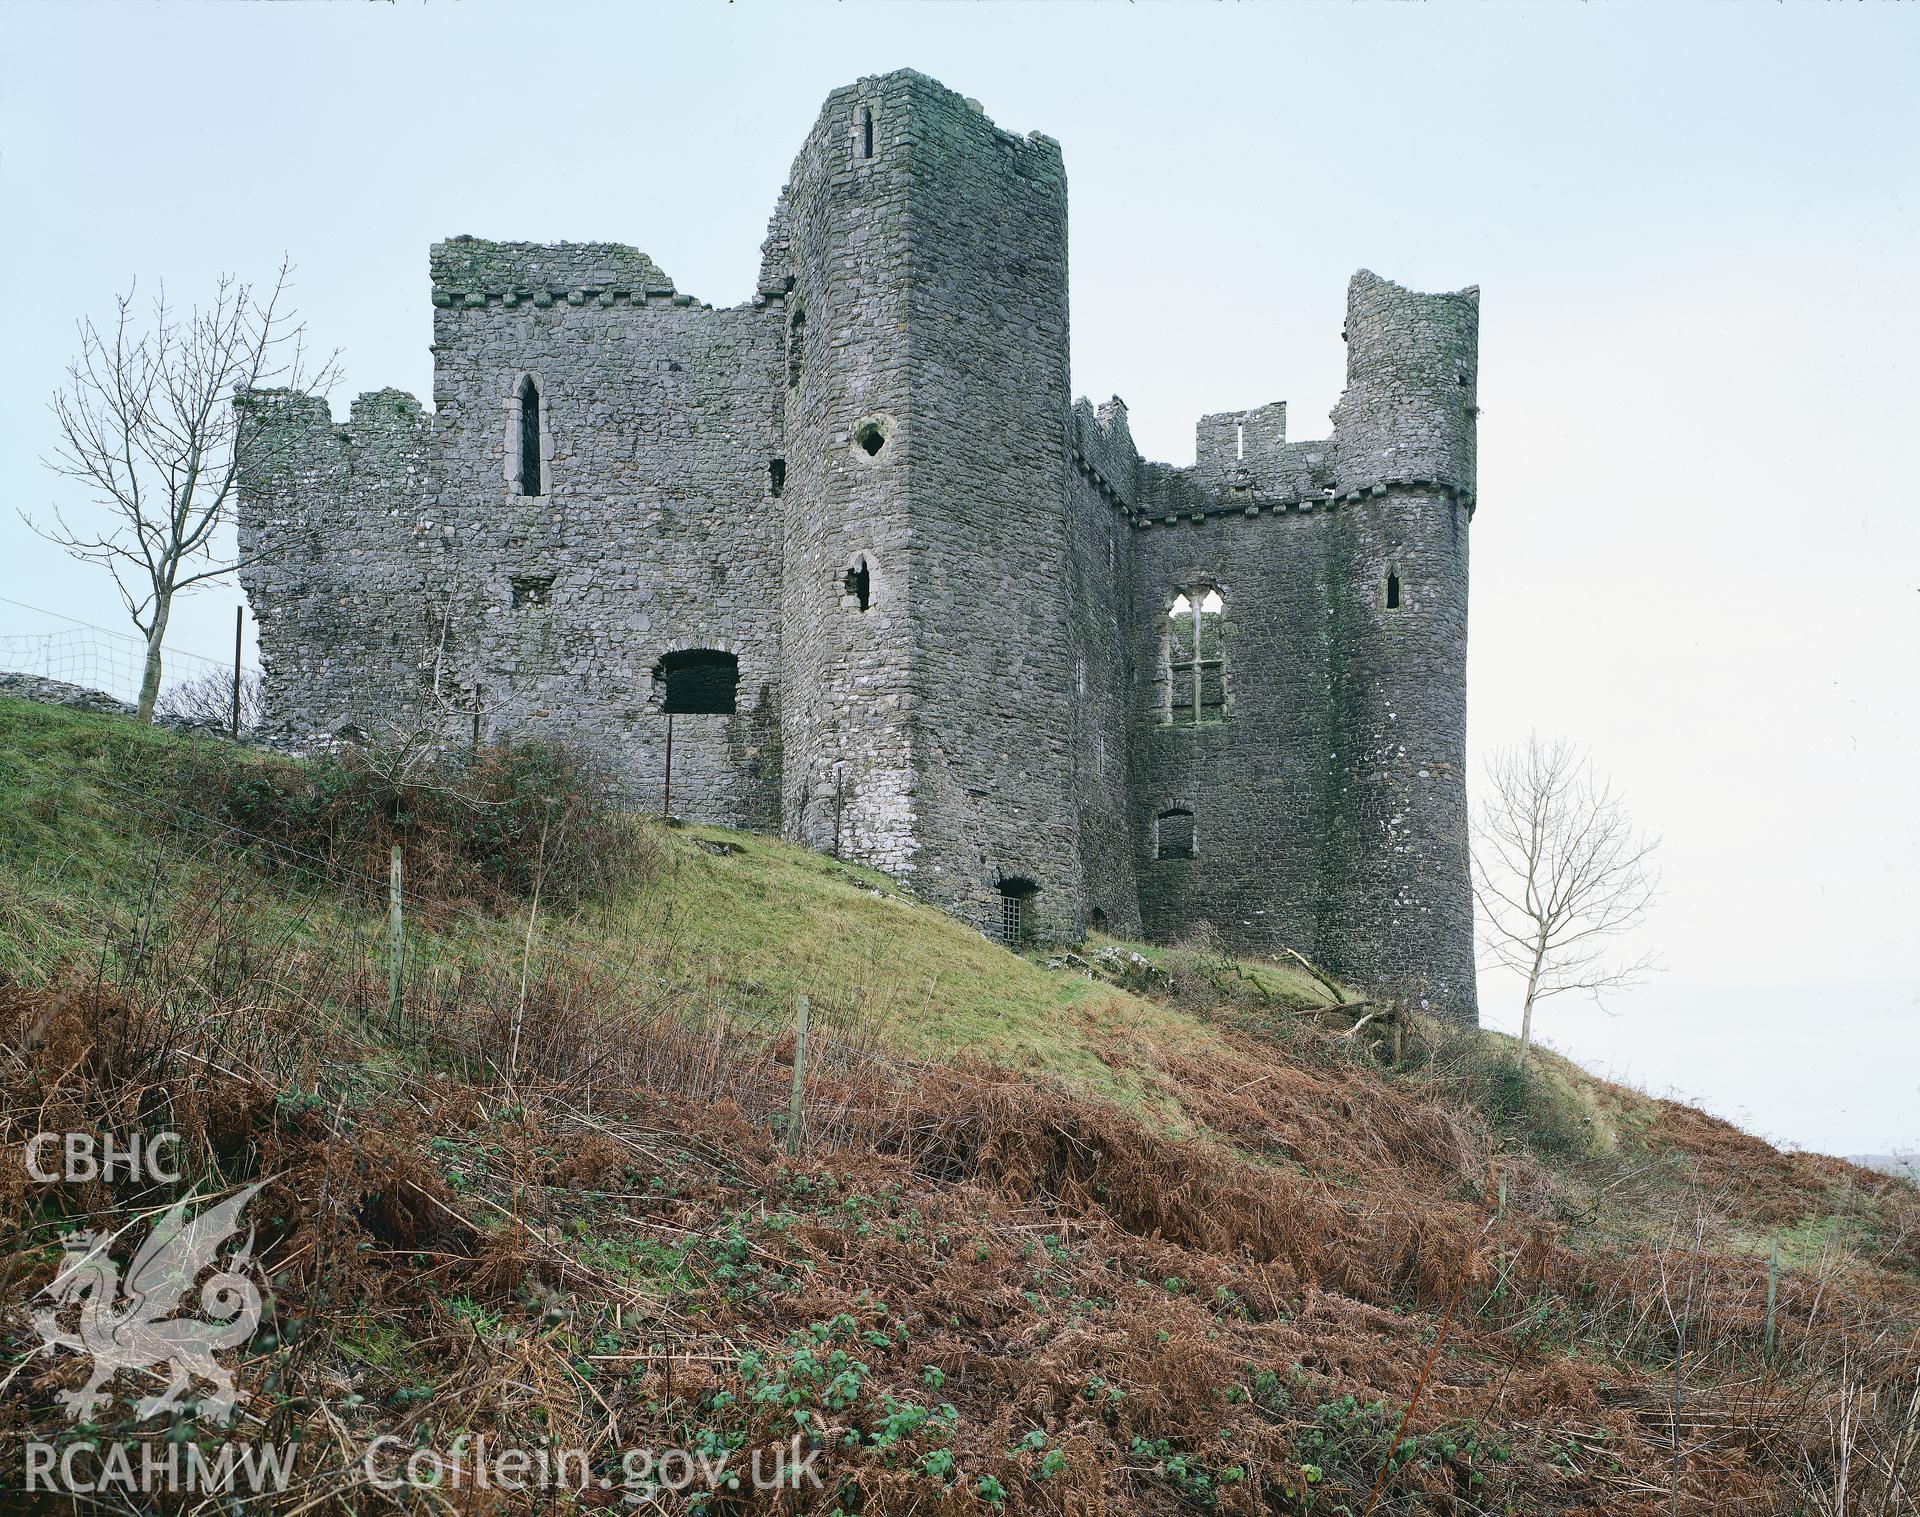 RCAHMW colour transparency showing Weobley Castle.